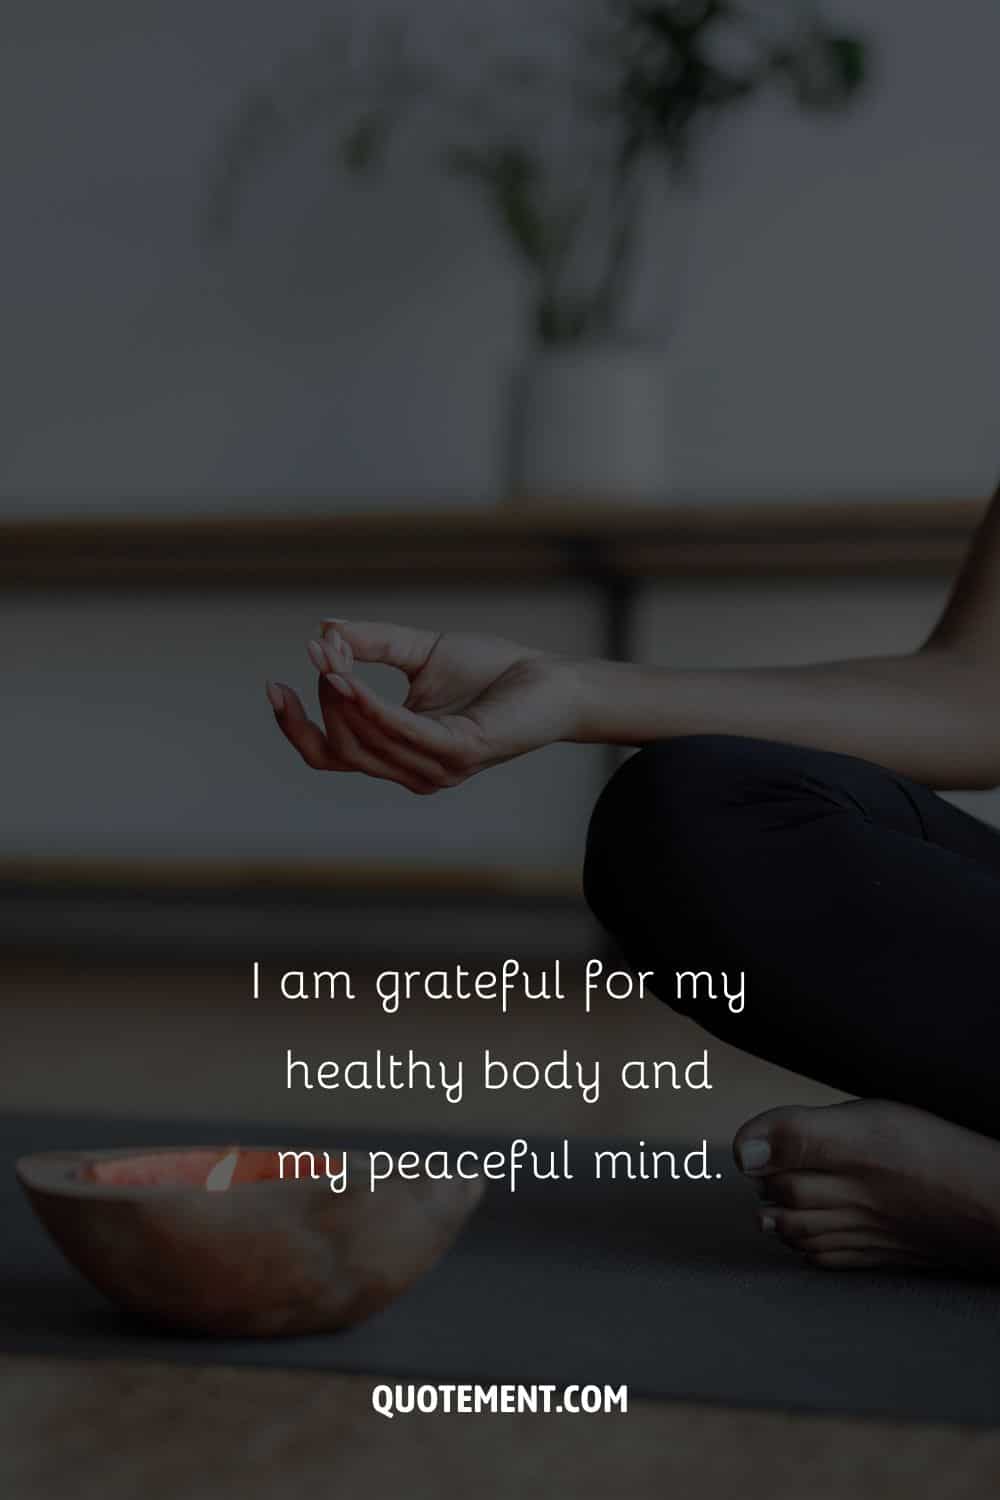 Image of a woman sitting in meditation representing an affirmation for Wednesday.